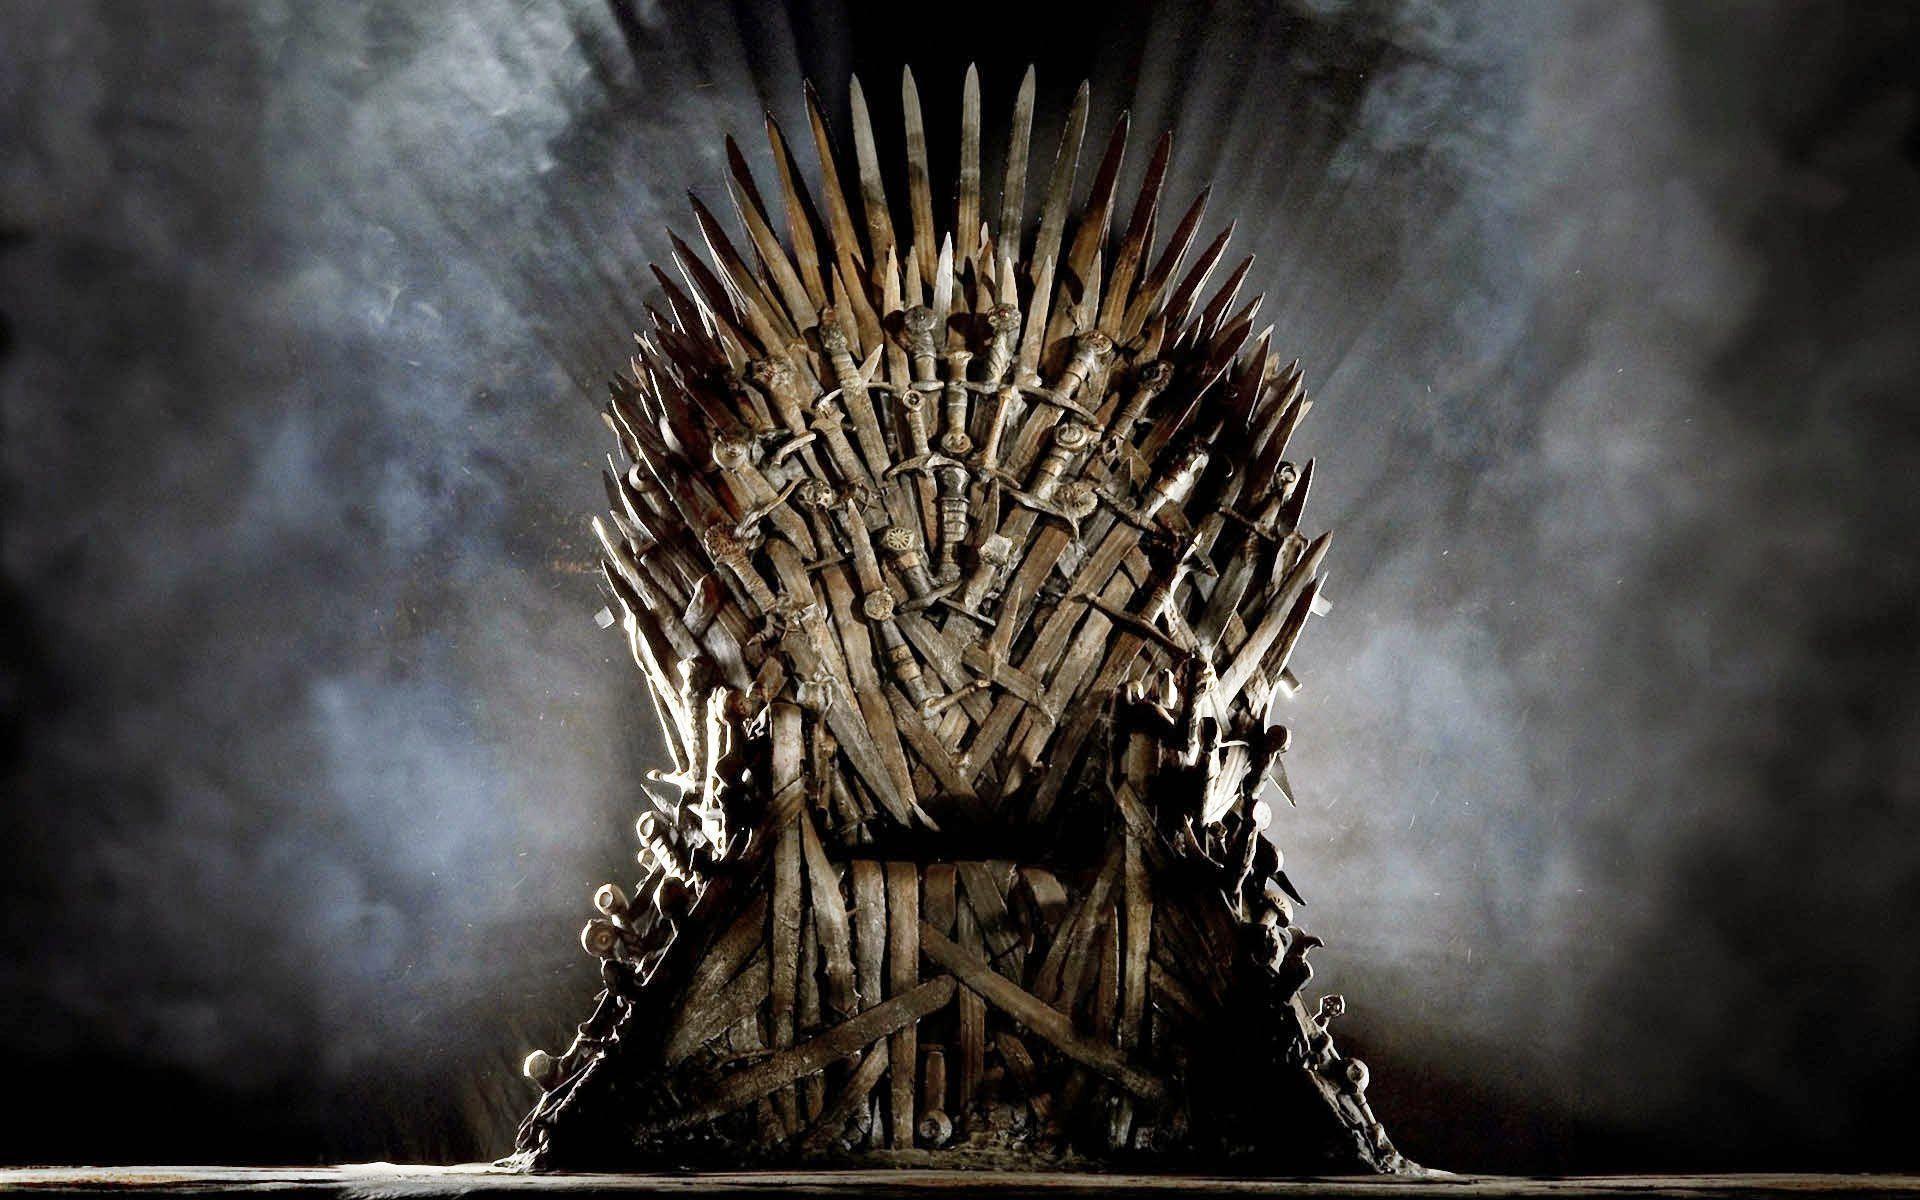 Game of Thrones Iron Throne Wallpapers   Top Game of Thrones 1920x1200